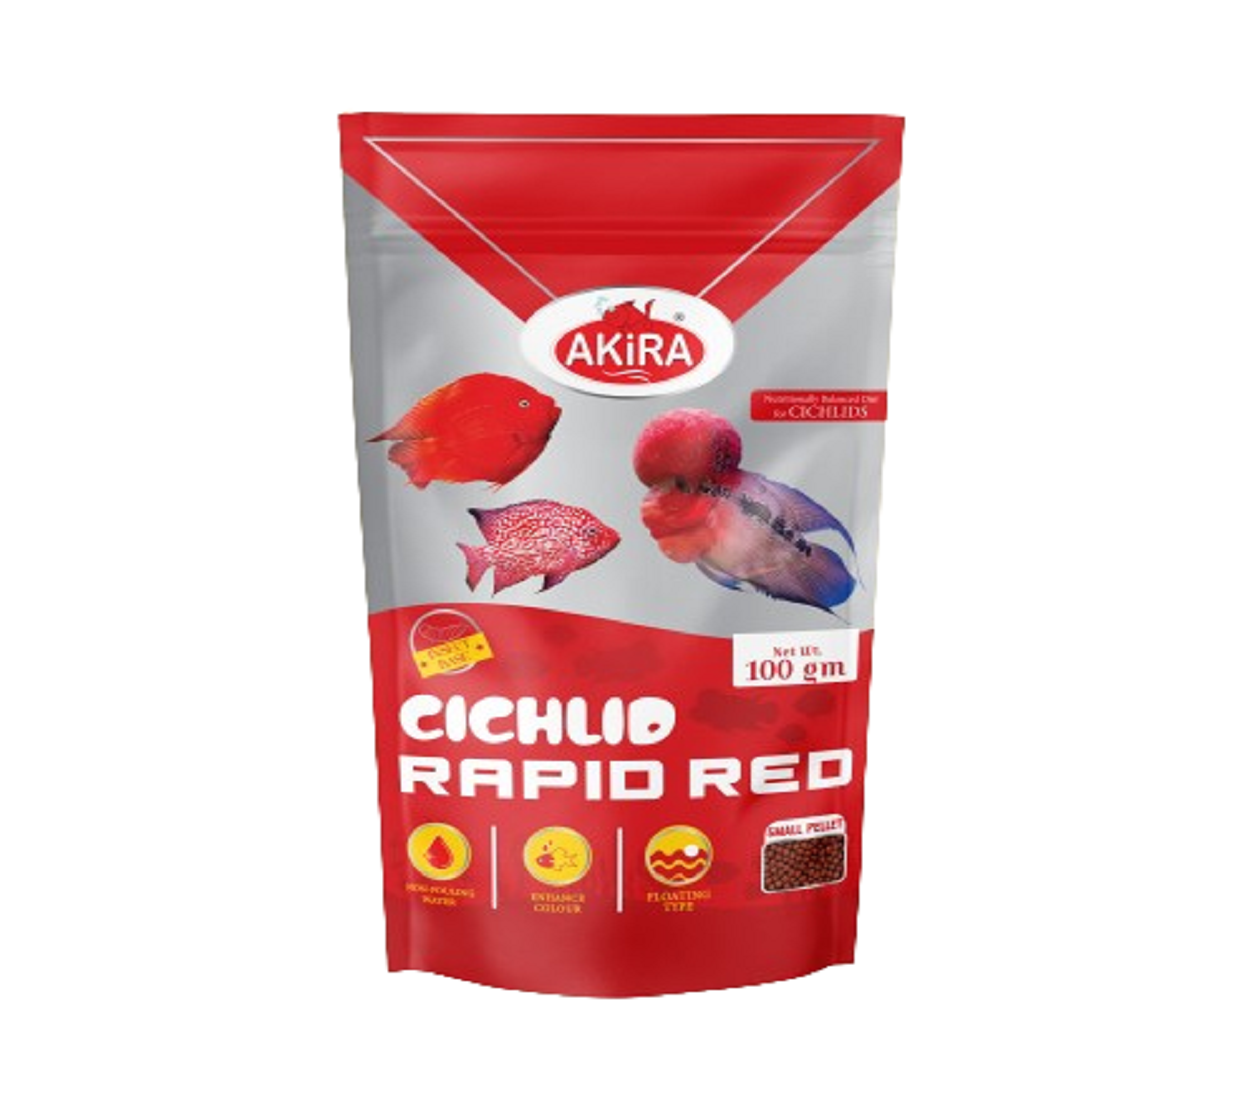 AKIRA CICHLID RAPID RED POUCH 2mm